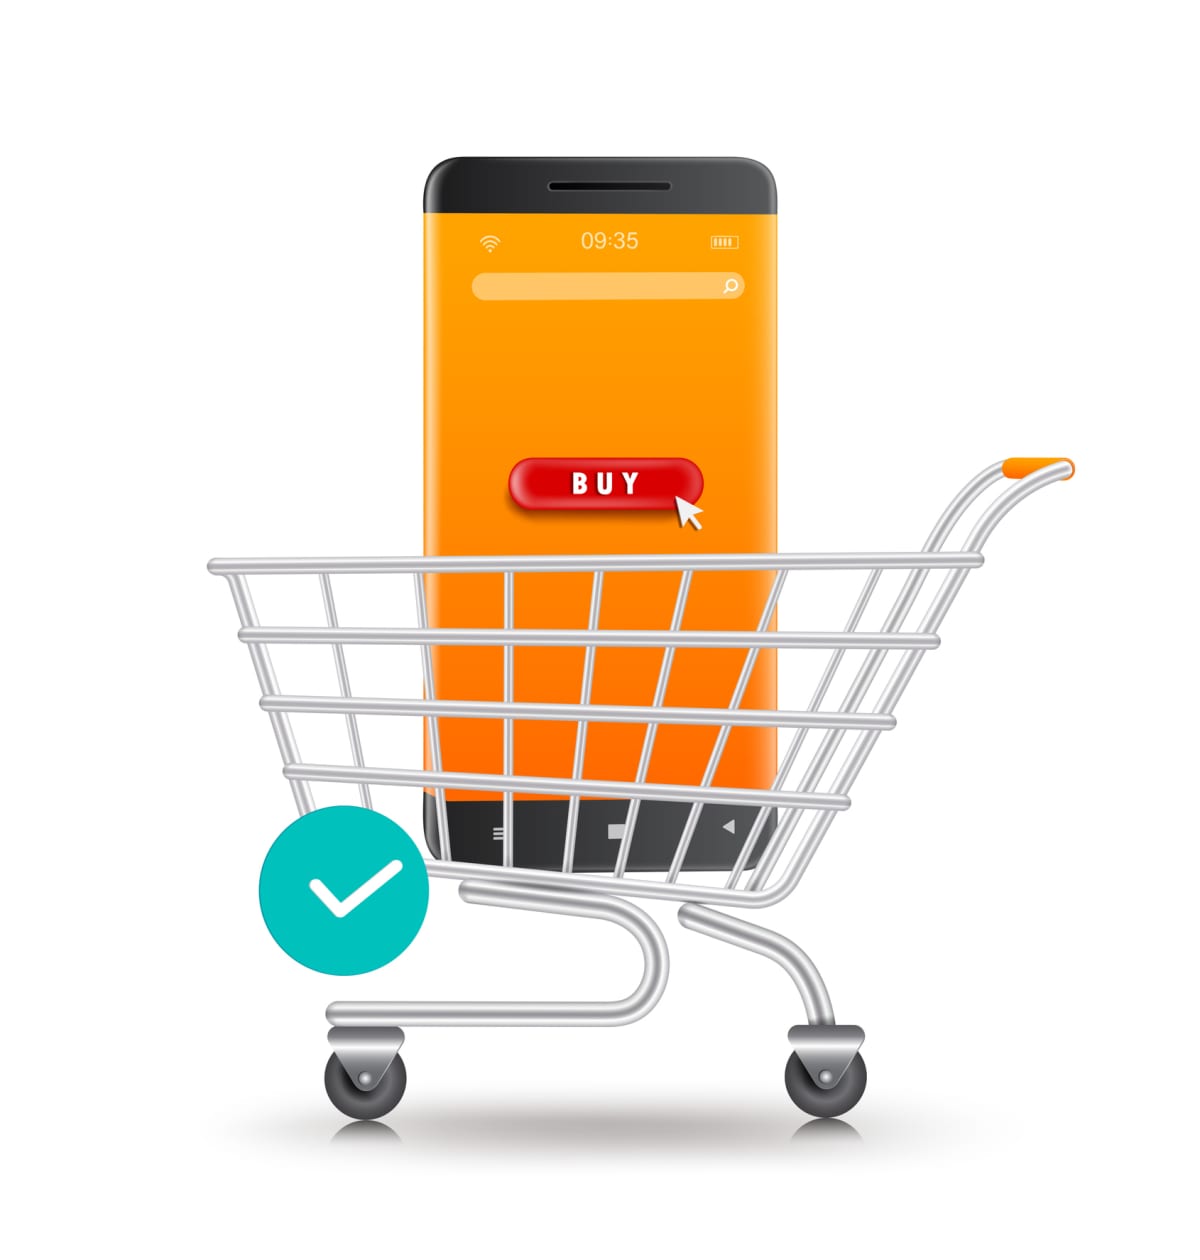 Cartoon of a large smartphone in a shopping cart, with a green checkmark, against a white background